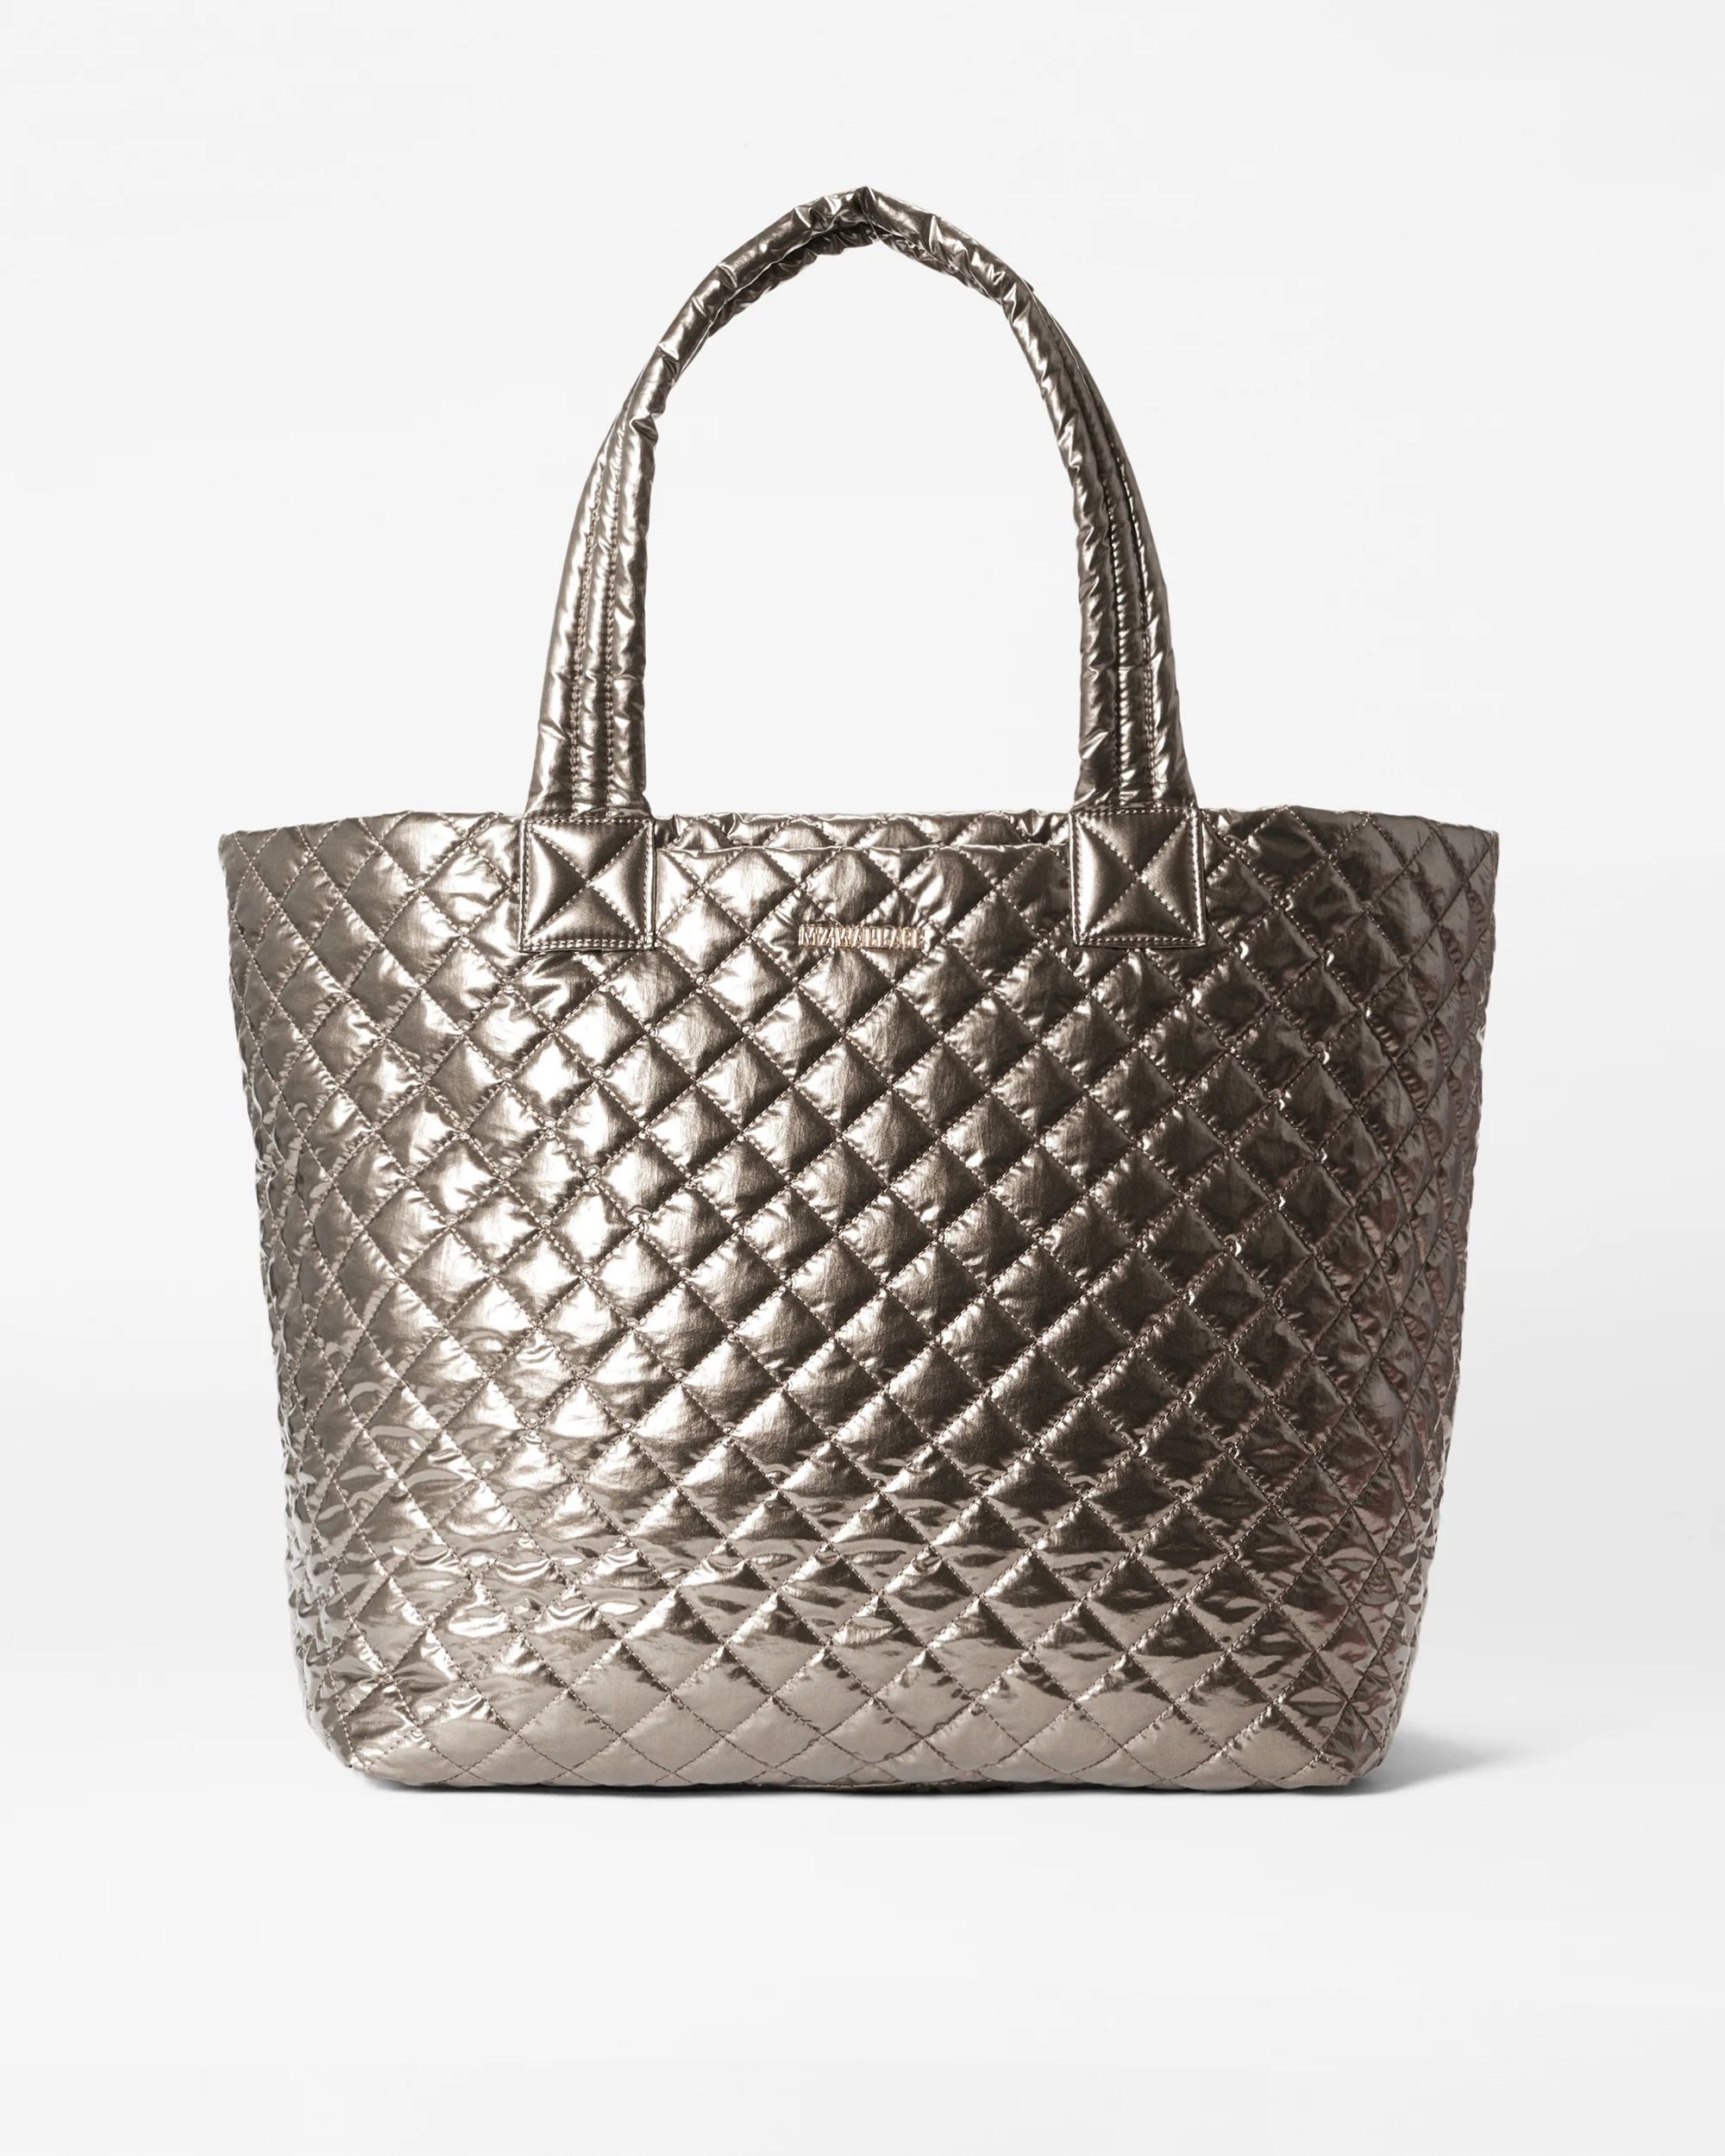 Large Deluxe Metro Quilted Tote Bag in Moondust Metallic Lacquer | MZ Wallace | MZ Wallace